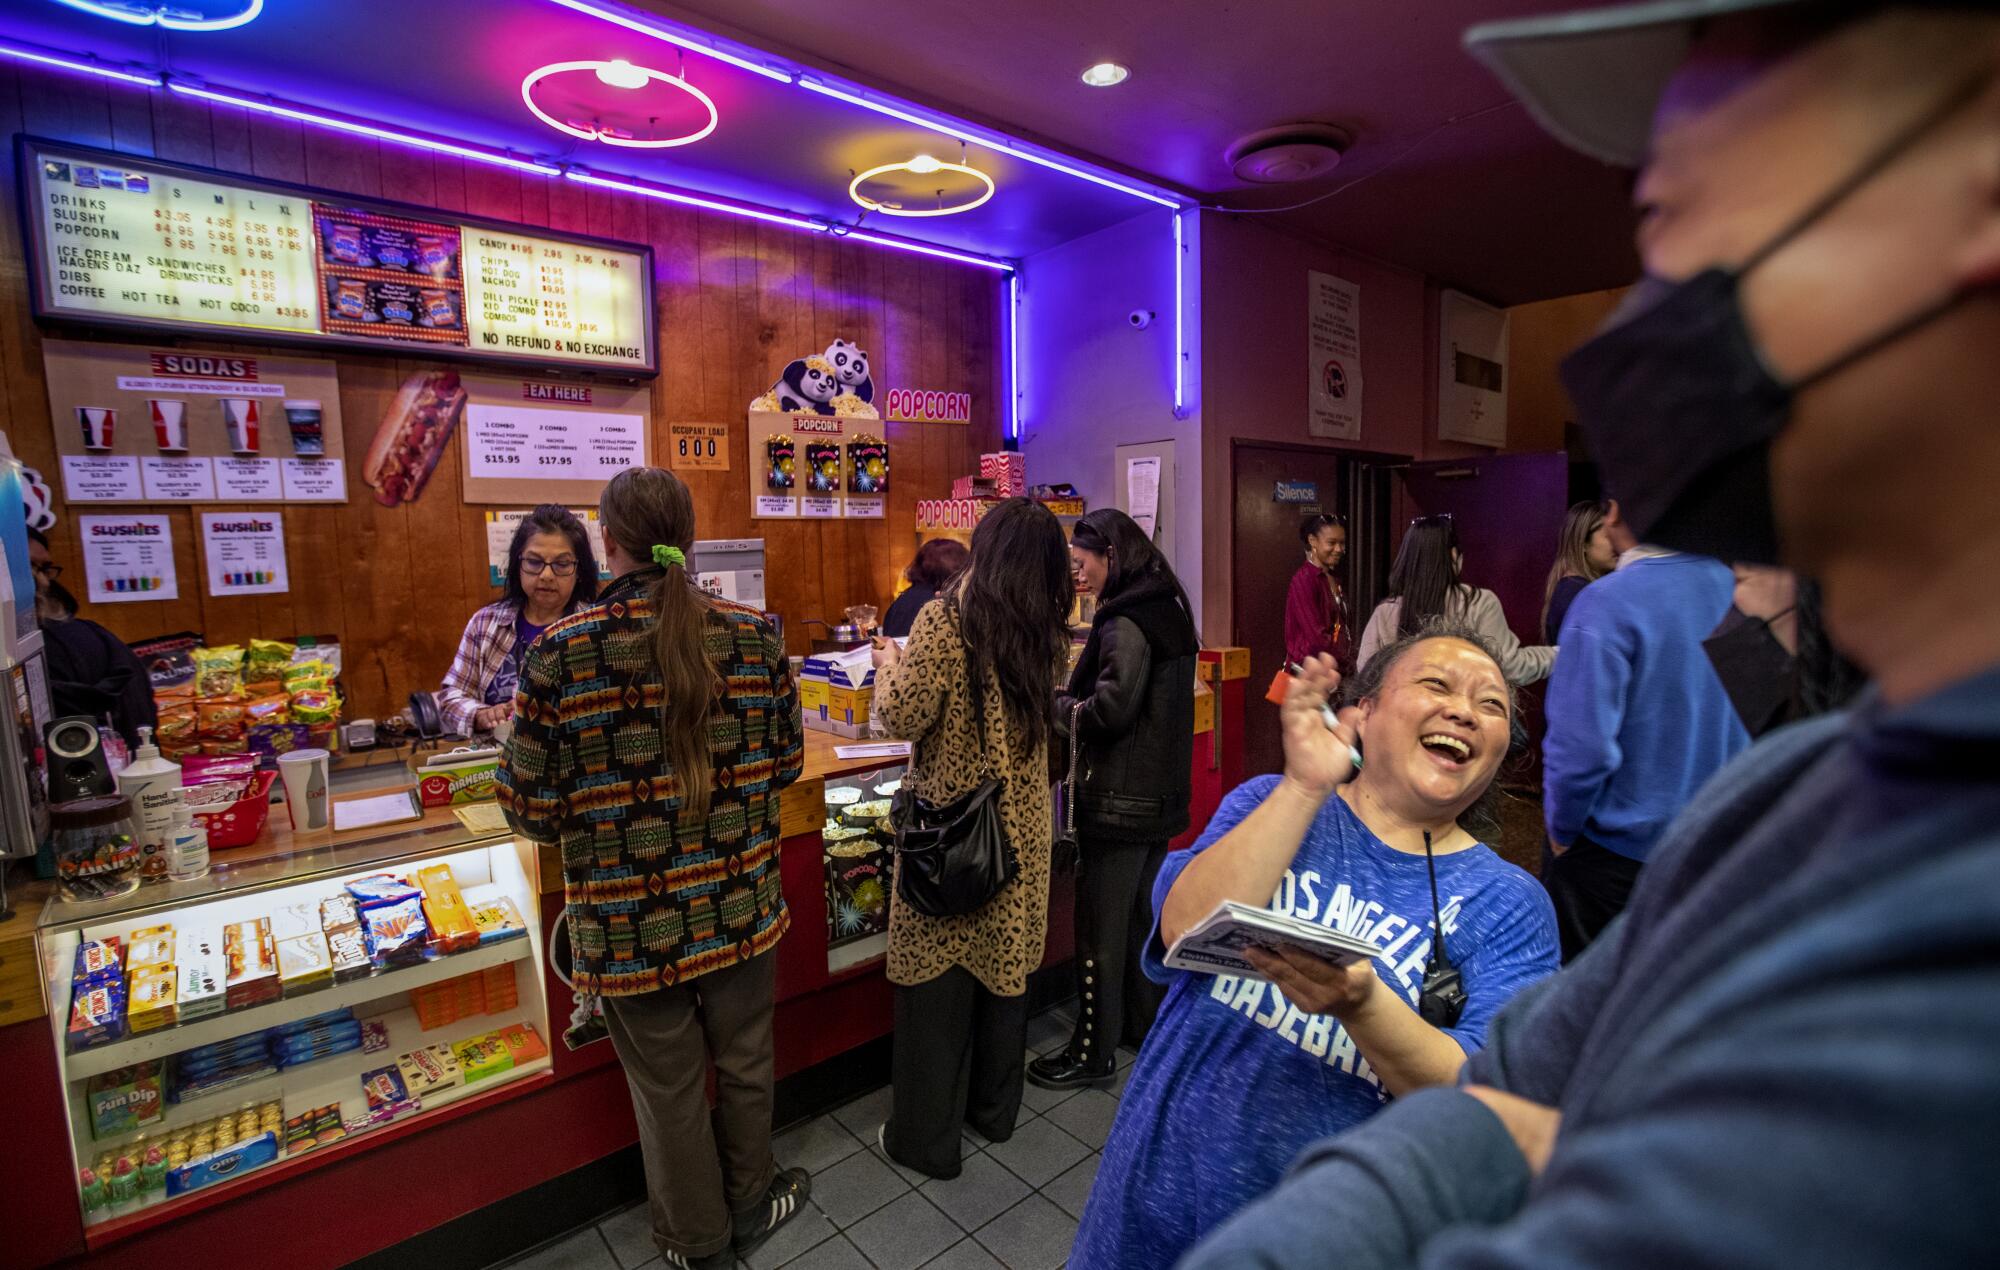 Judy Kim laughs as she takes a customer's food order in a movie theatre foyer